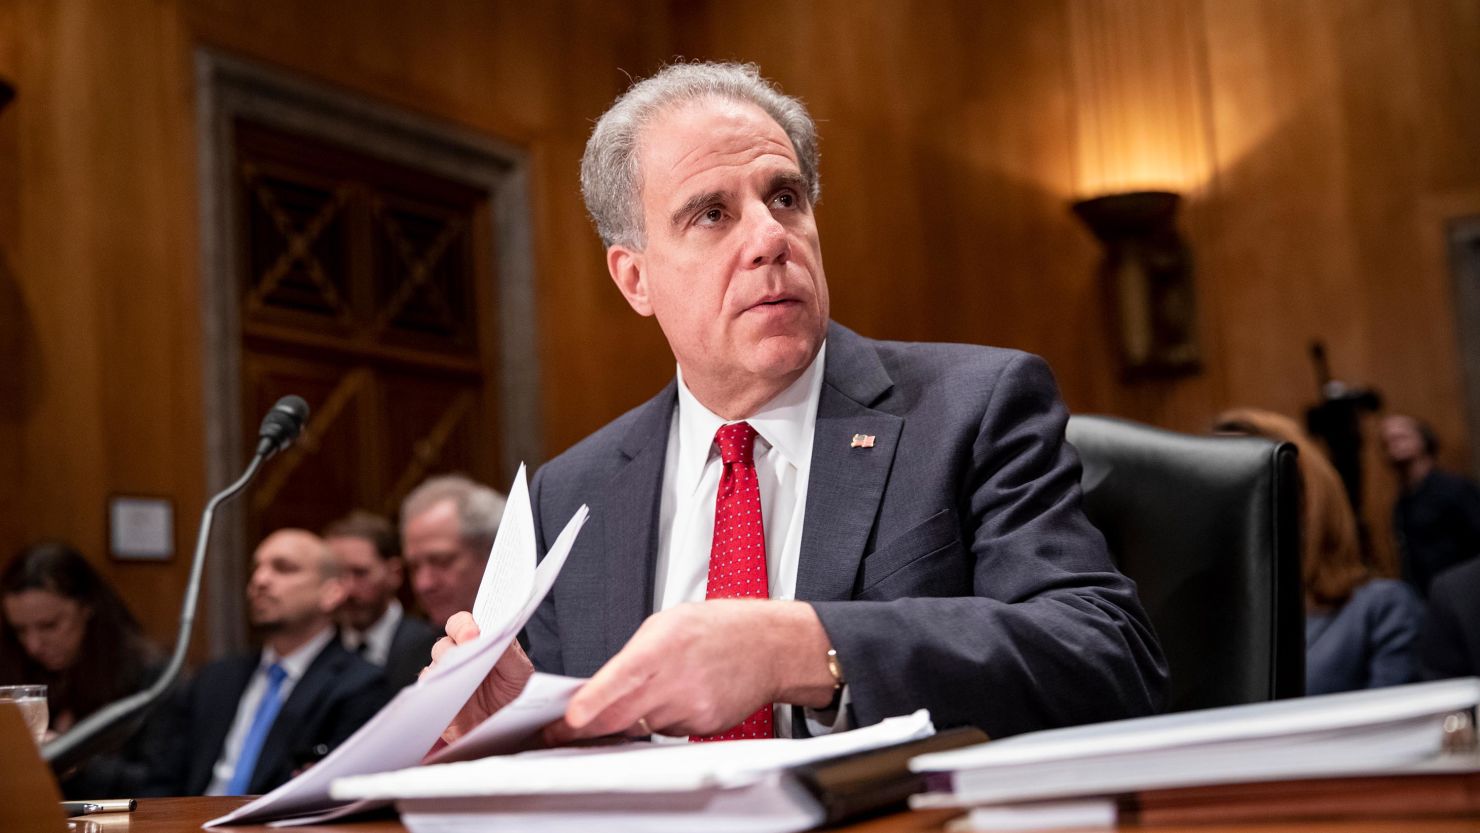 Department of Justice Inspector General Michael Horowitz prepares to testify in a Senate committee in December. Horowitz is serving as acting chair of the Pandemic Response Accountability Committee, which released its report Wednesday.